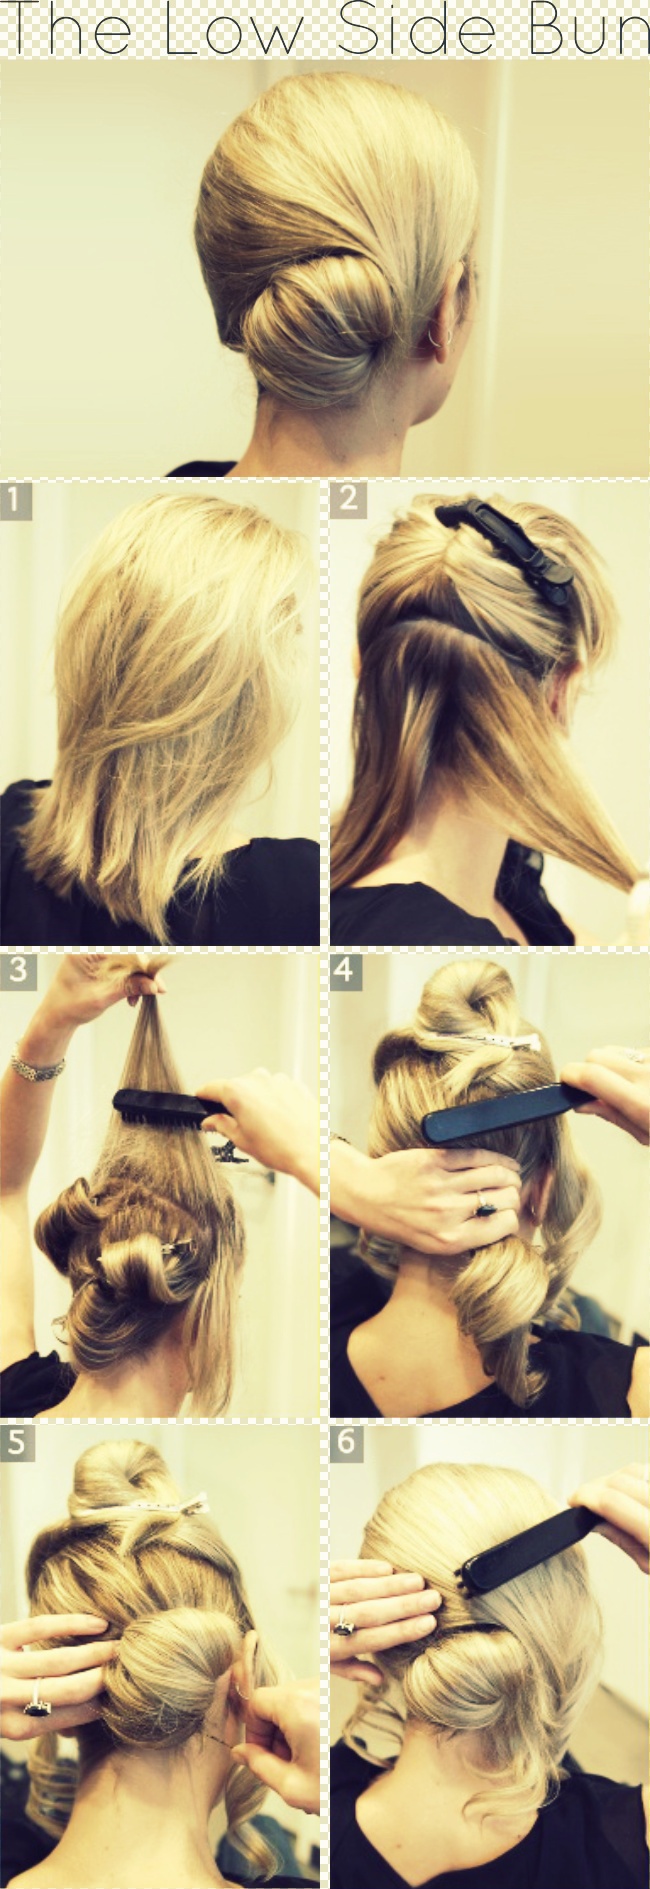 The Low Side Bun Hairstyle Tutorial